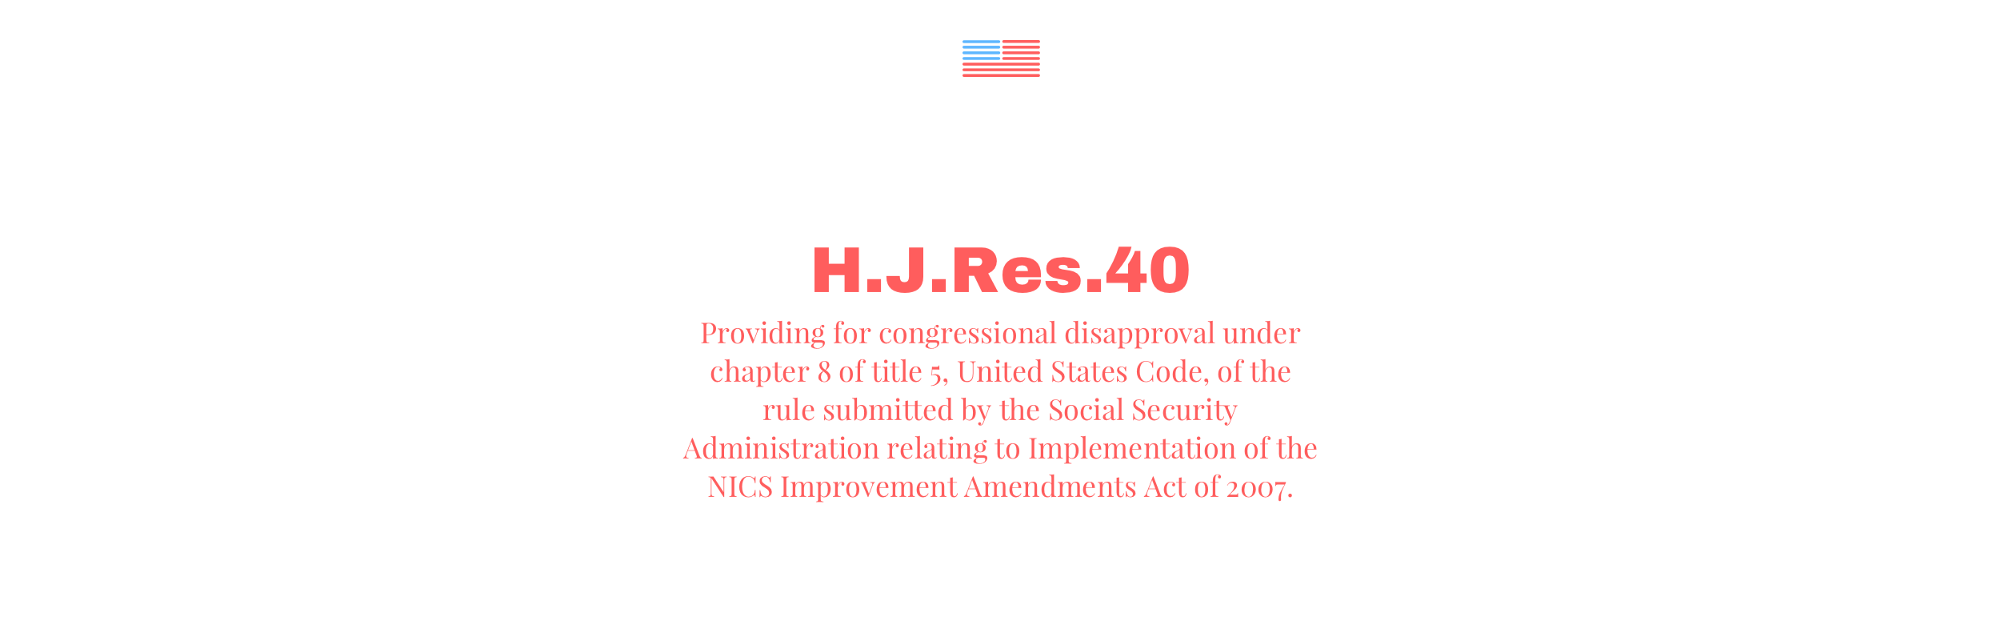 H.J.Res.40 — Providing for congressional disapproval under chapter 8 of  title 5, United States Code, of the rule submitted by the Social Security